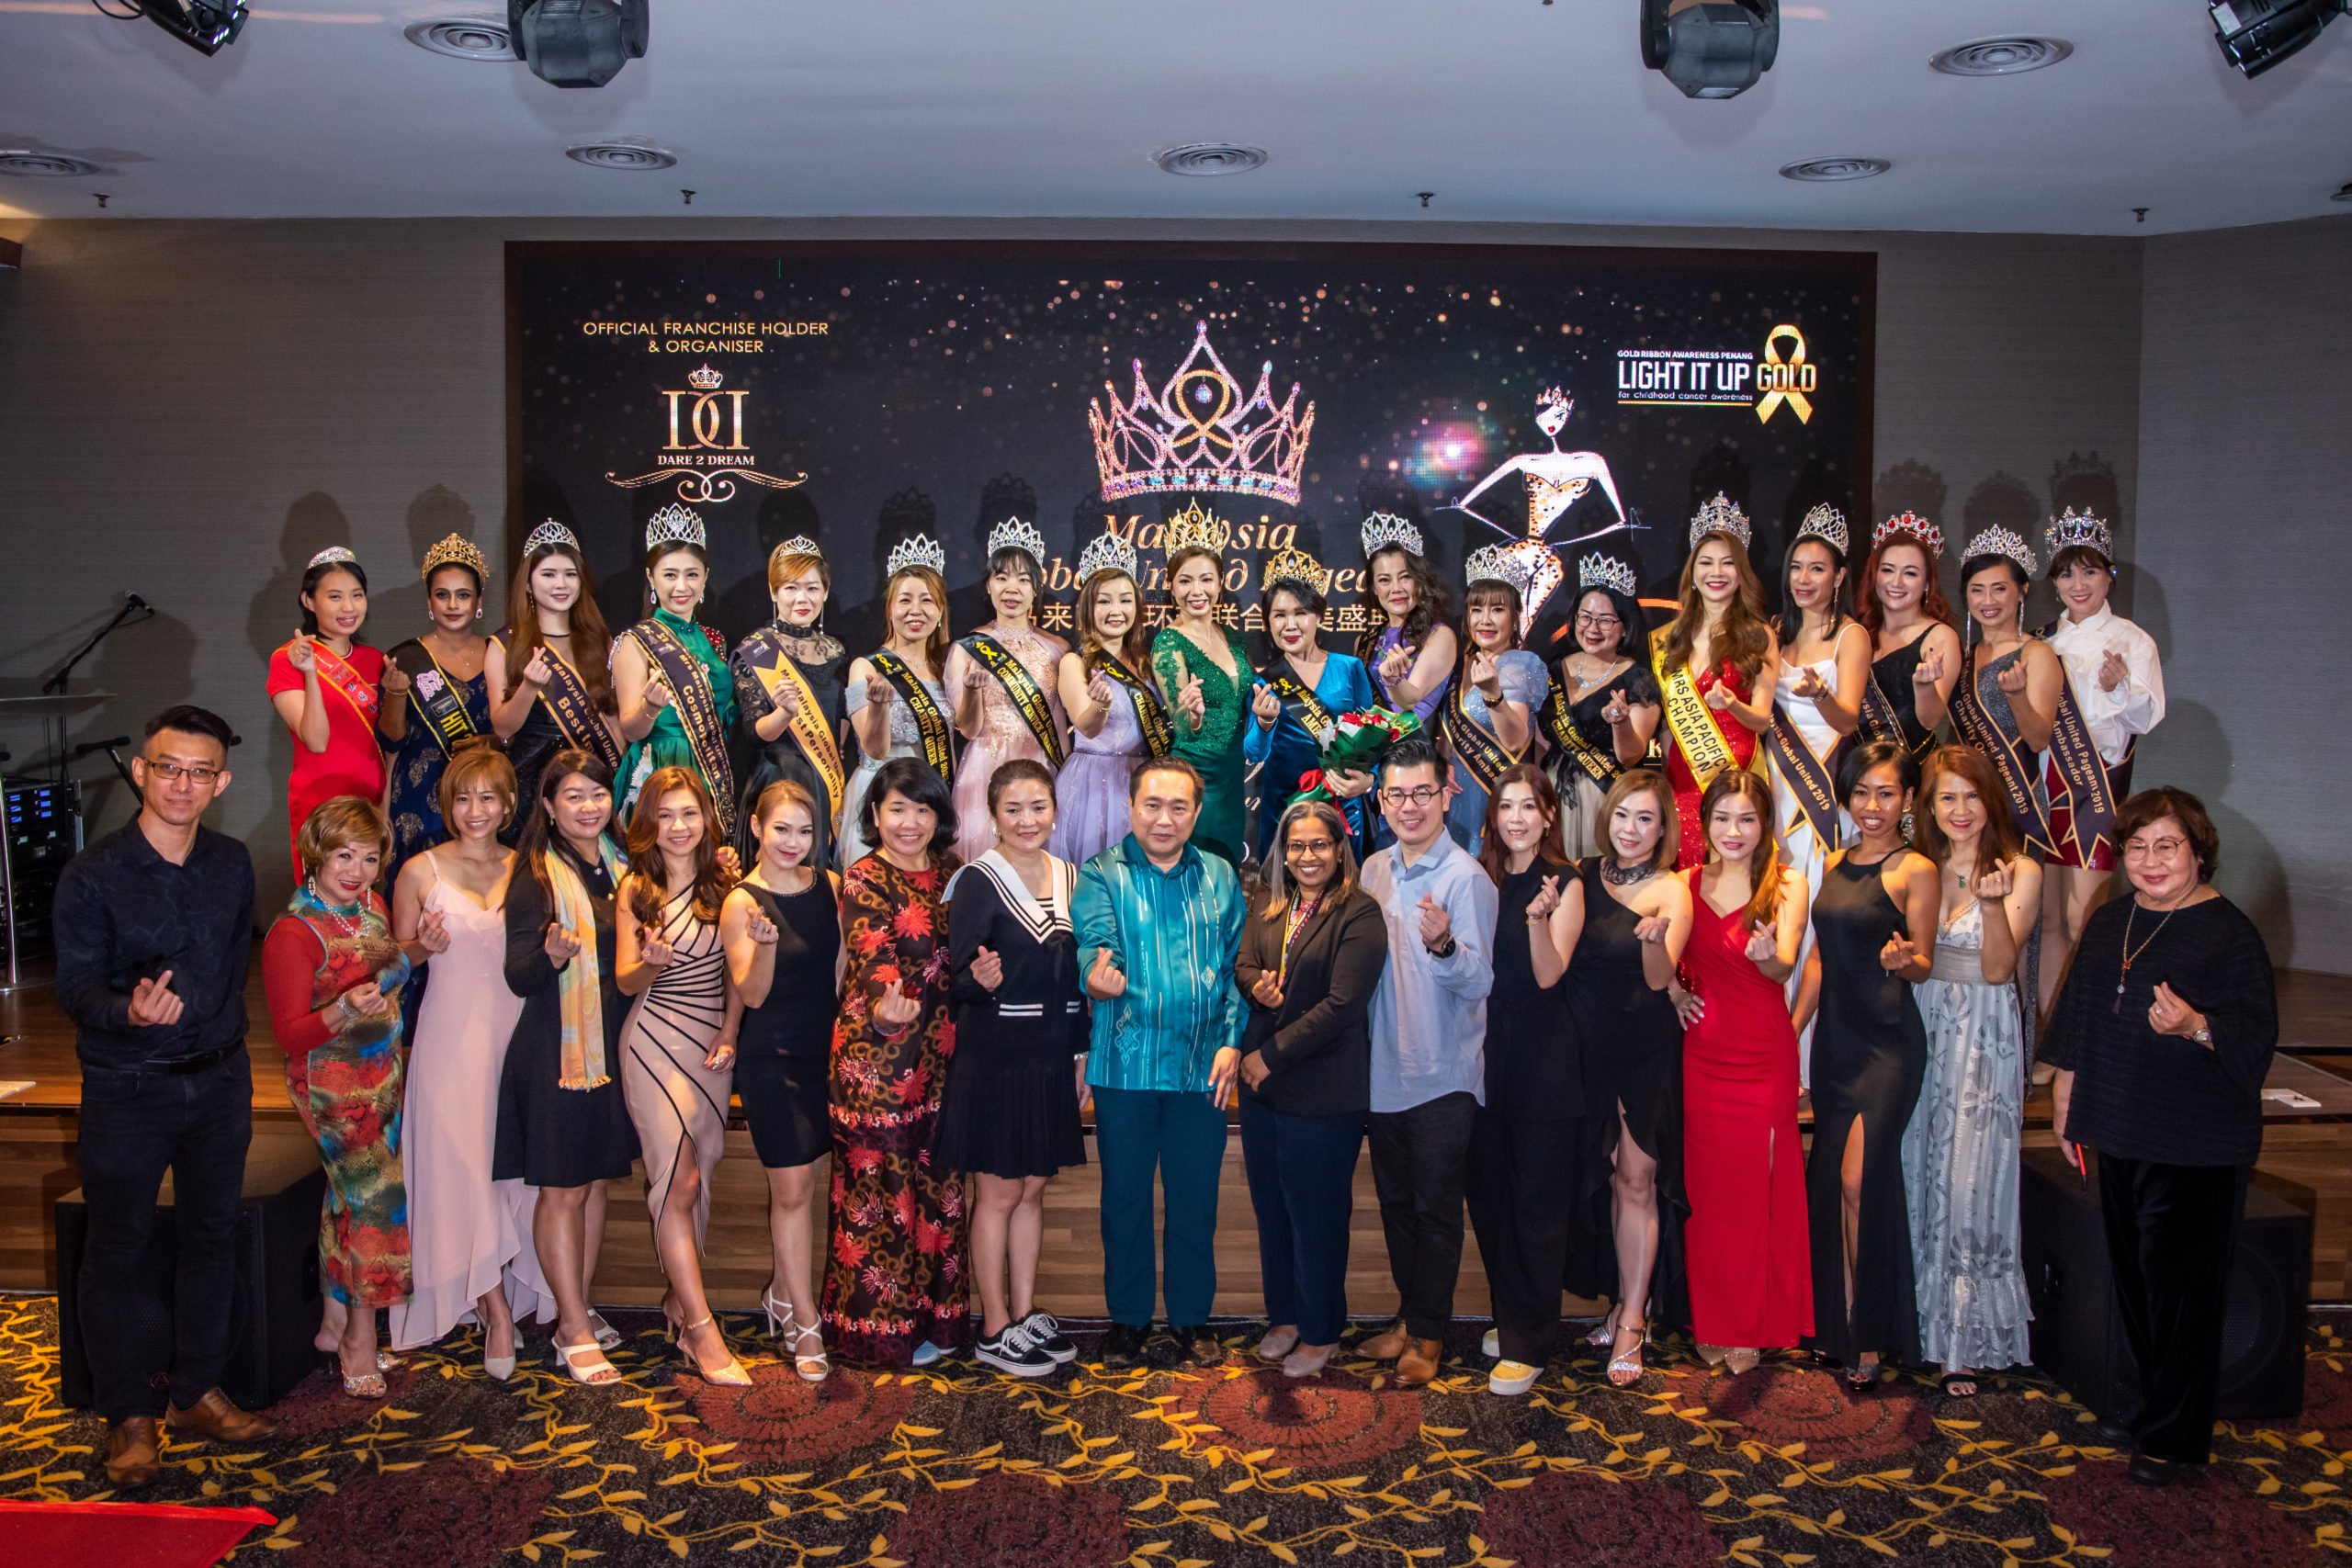 A group photo of all charity beauties, charity ambassadors, working committees and representatives of beneficiary groups.